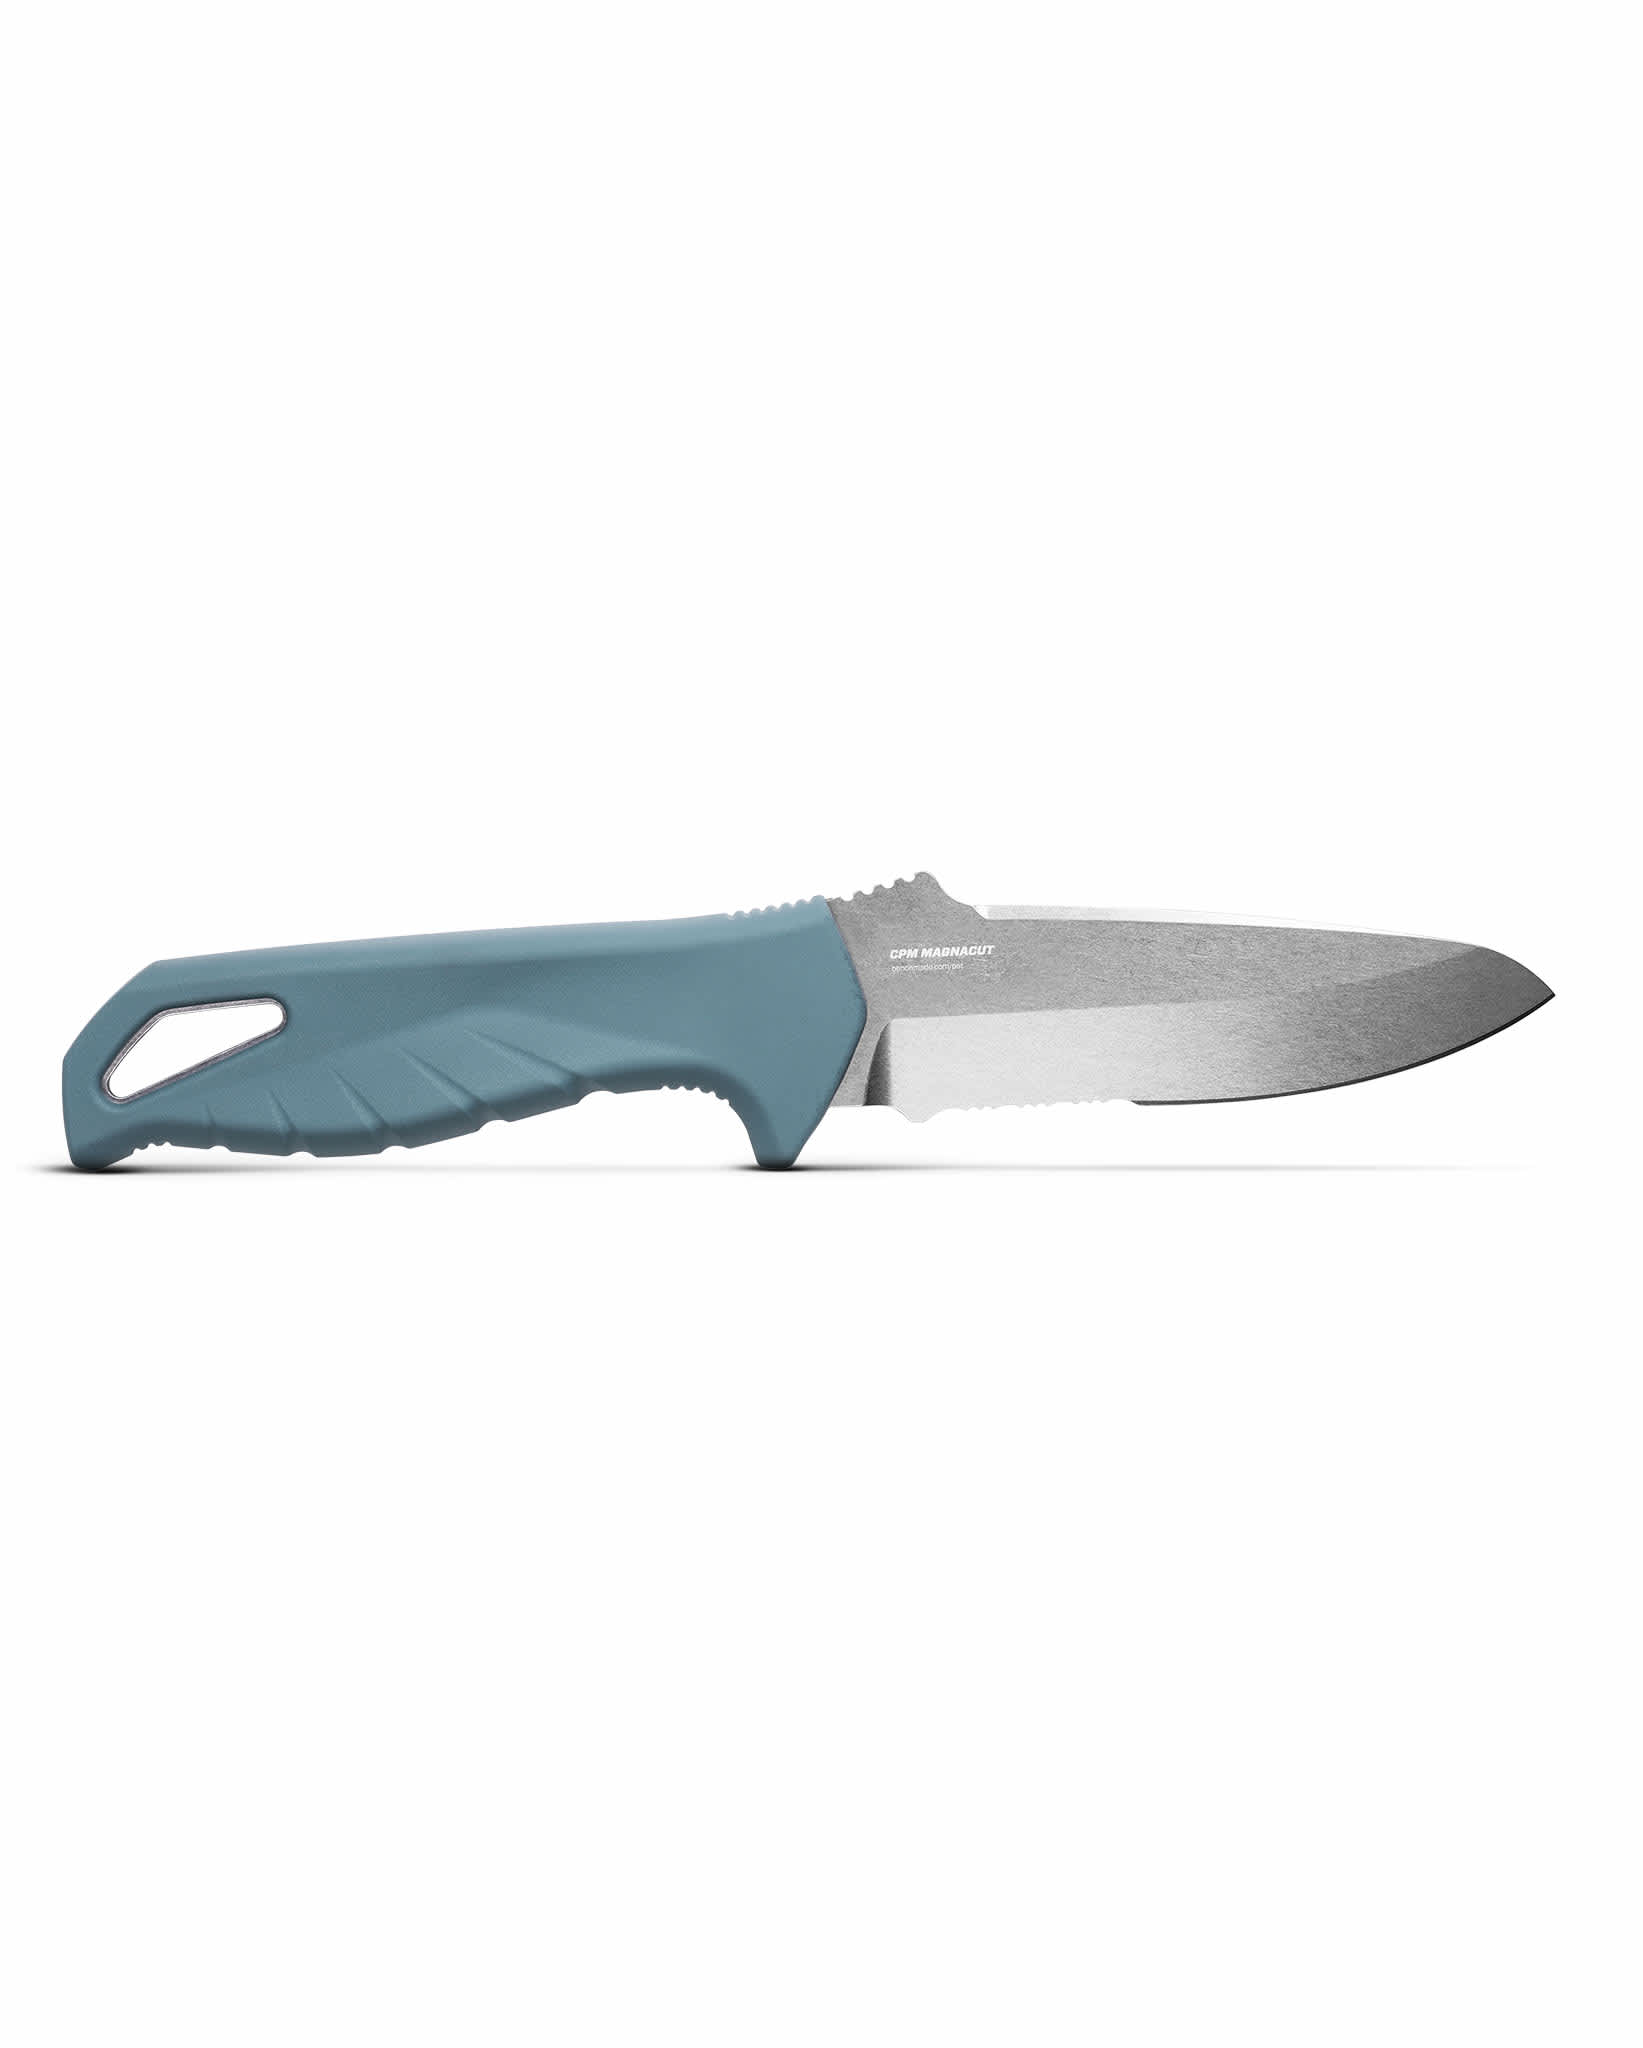 Benchmade® 18040S Undercurrent Fixed Blade Knife